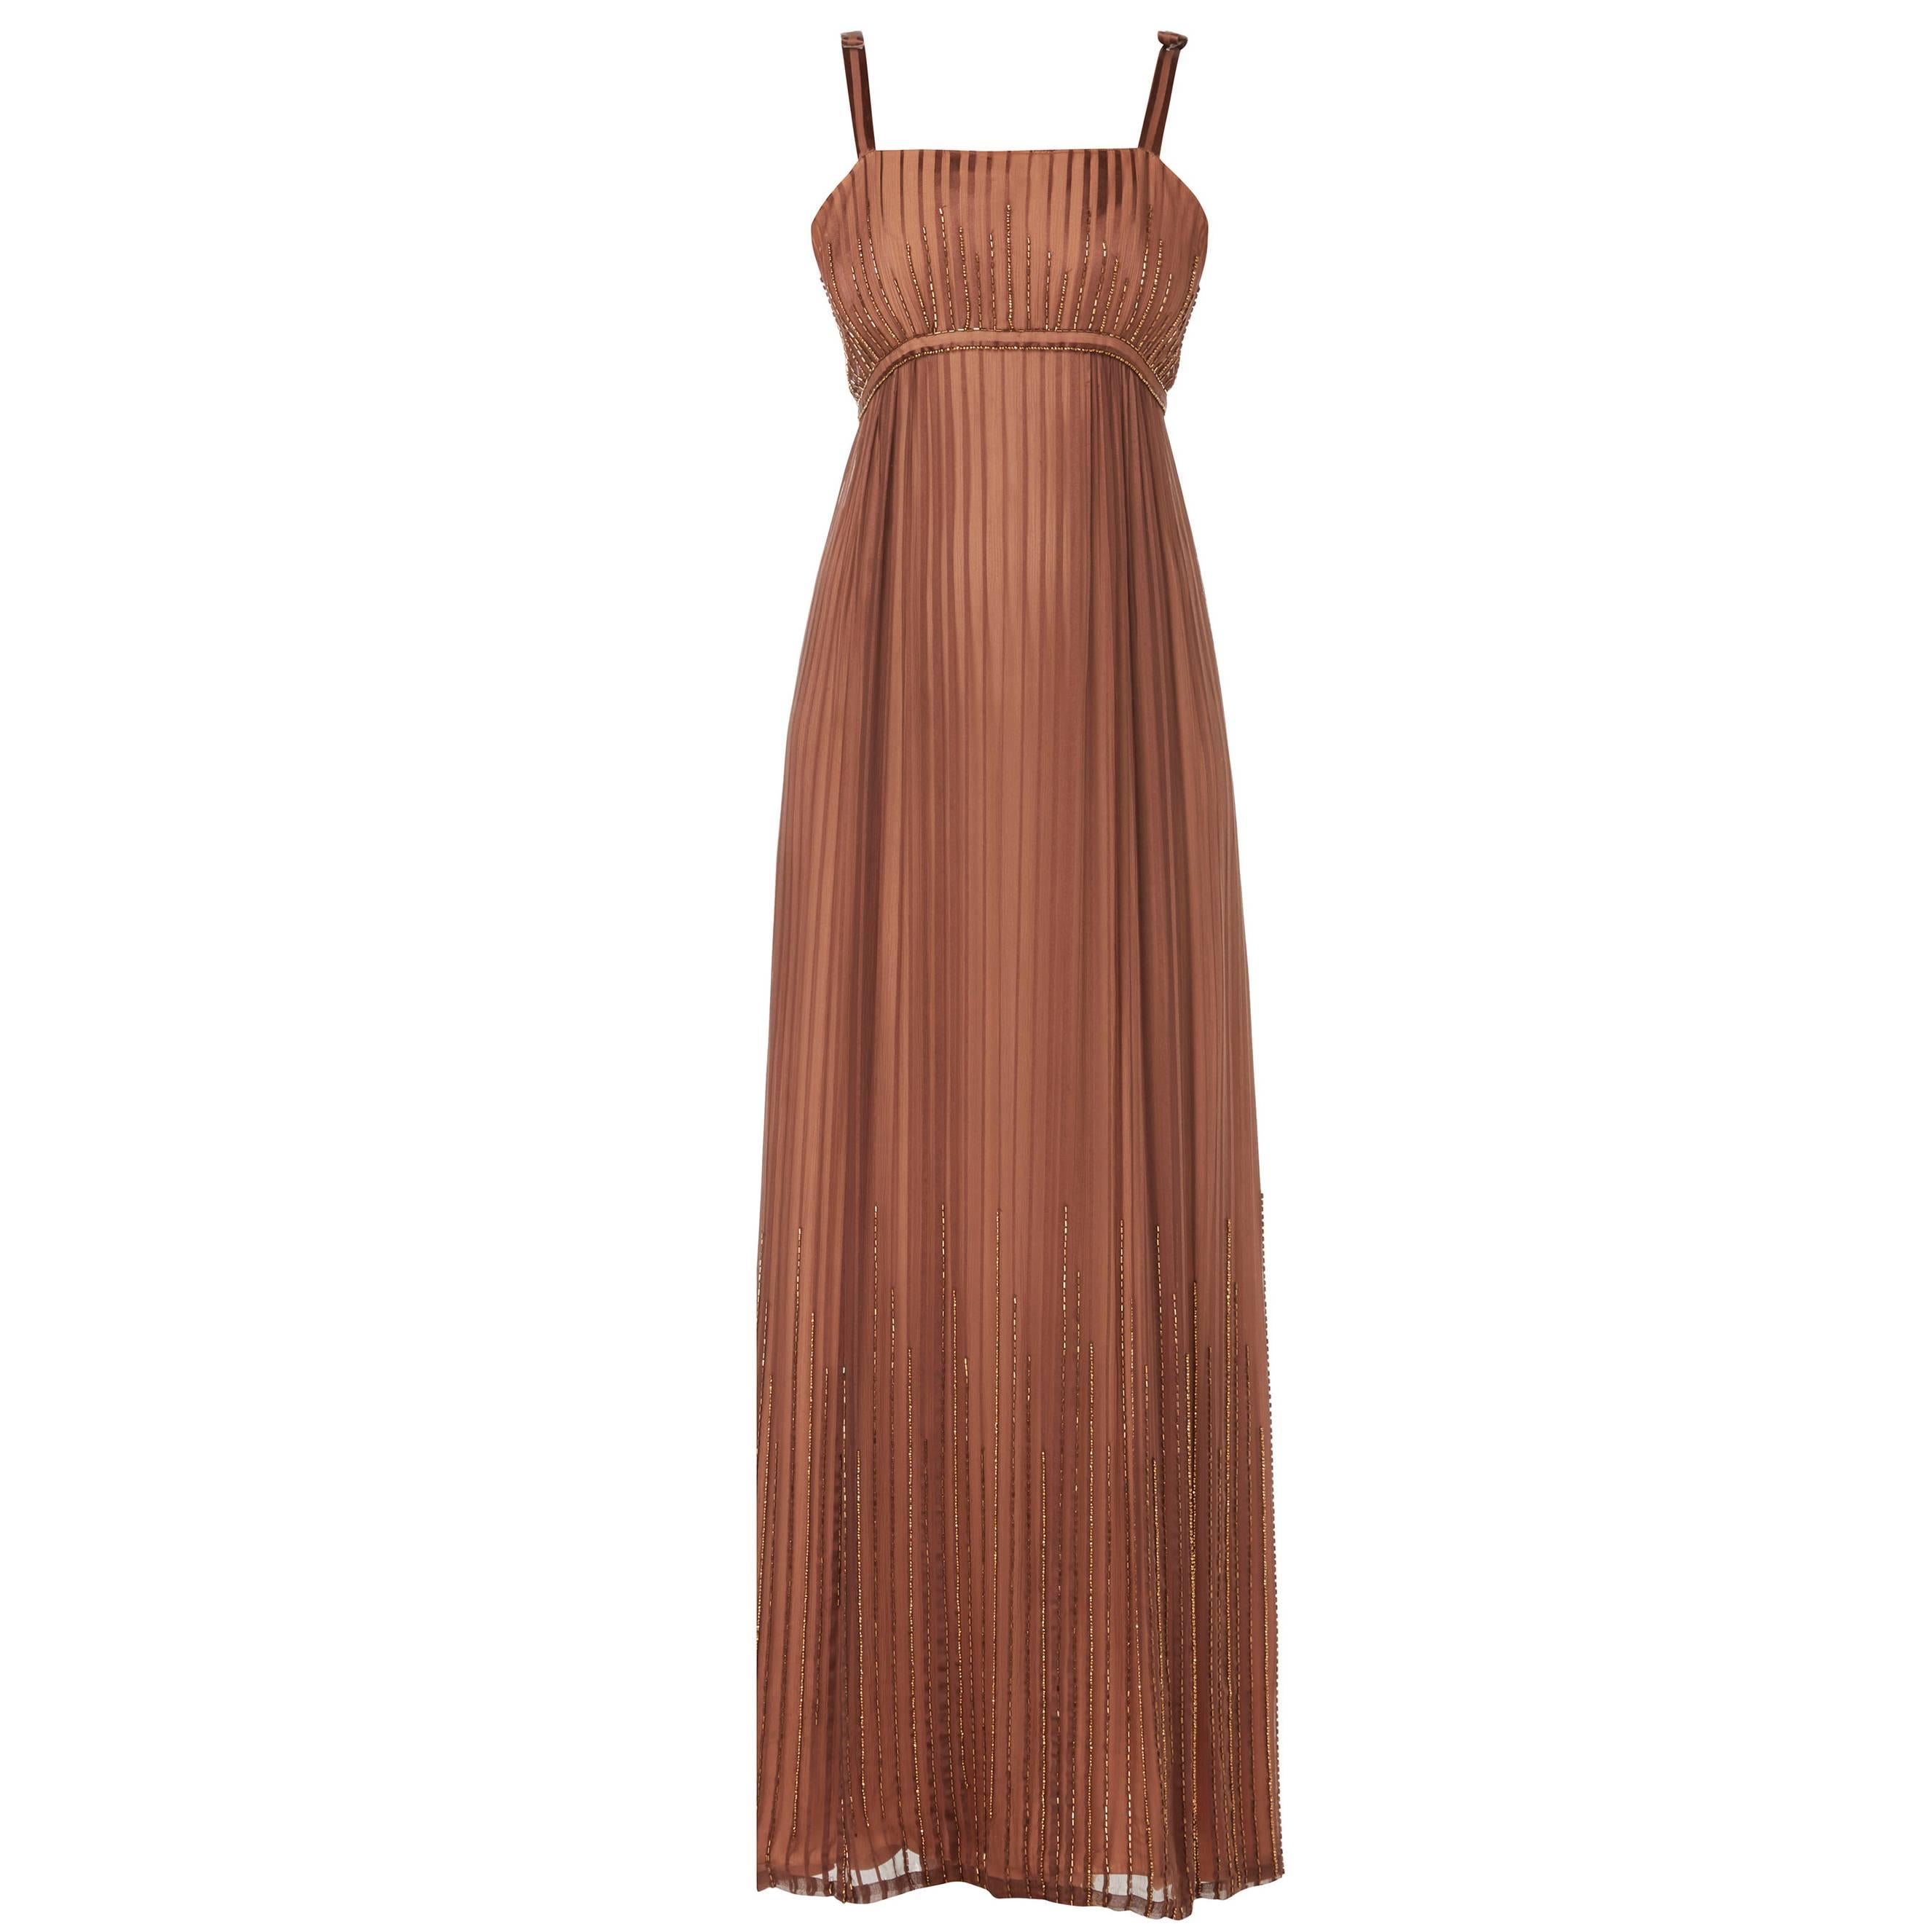 Alfred Bosand brown beaded dress, circa 1968 For Sale